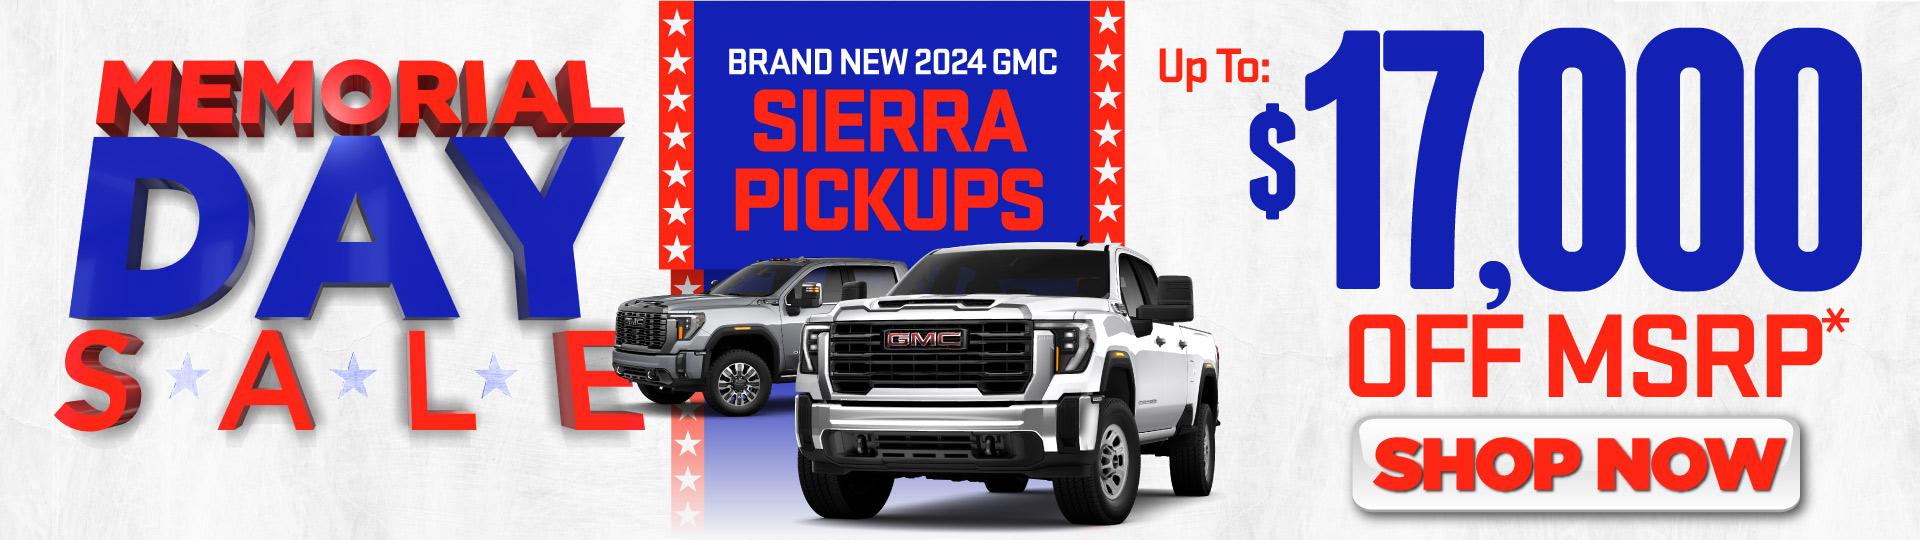 Brand New 2024 GMC Sierra Pickups | Up to: $17,000 off MSRP | Shop Now